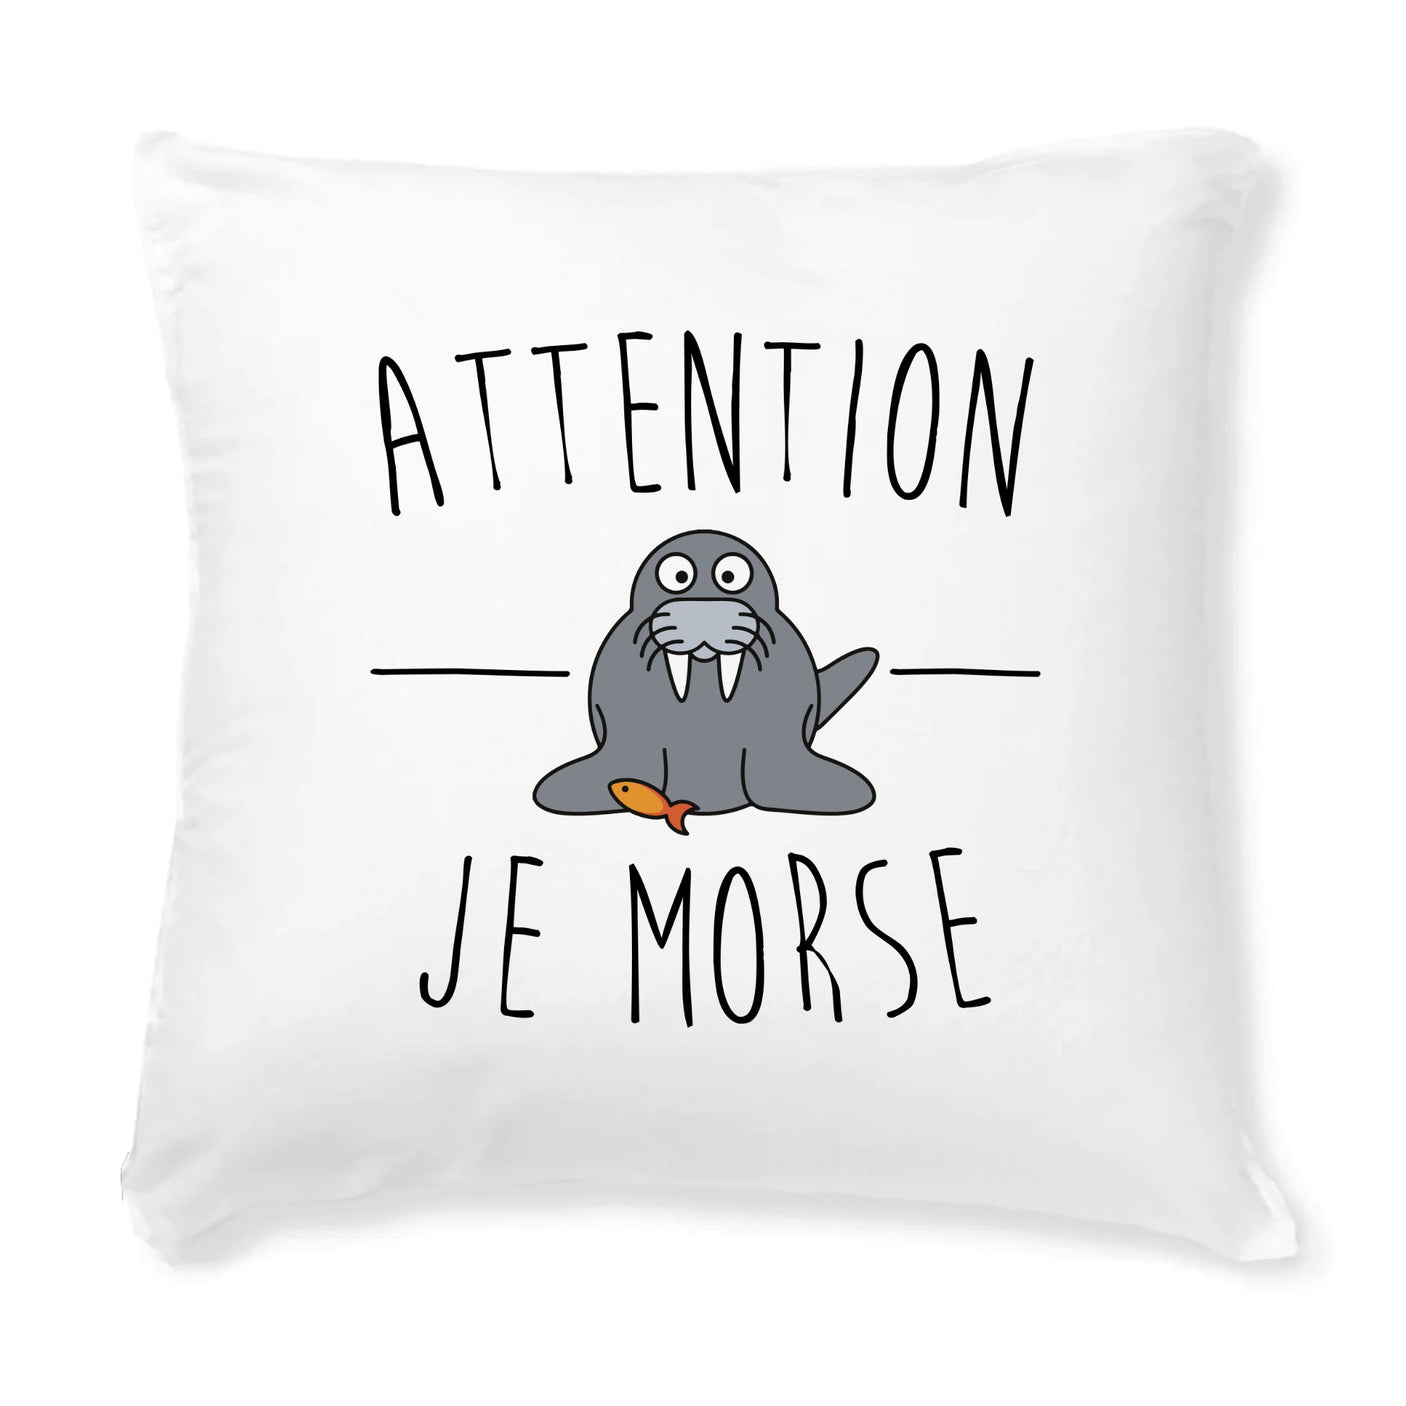 Coussin Attention je mords 